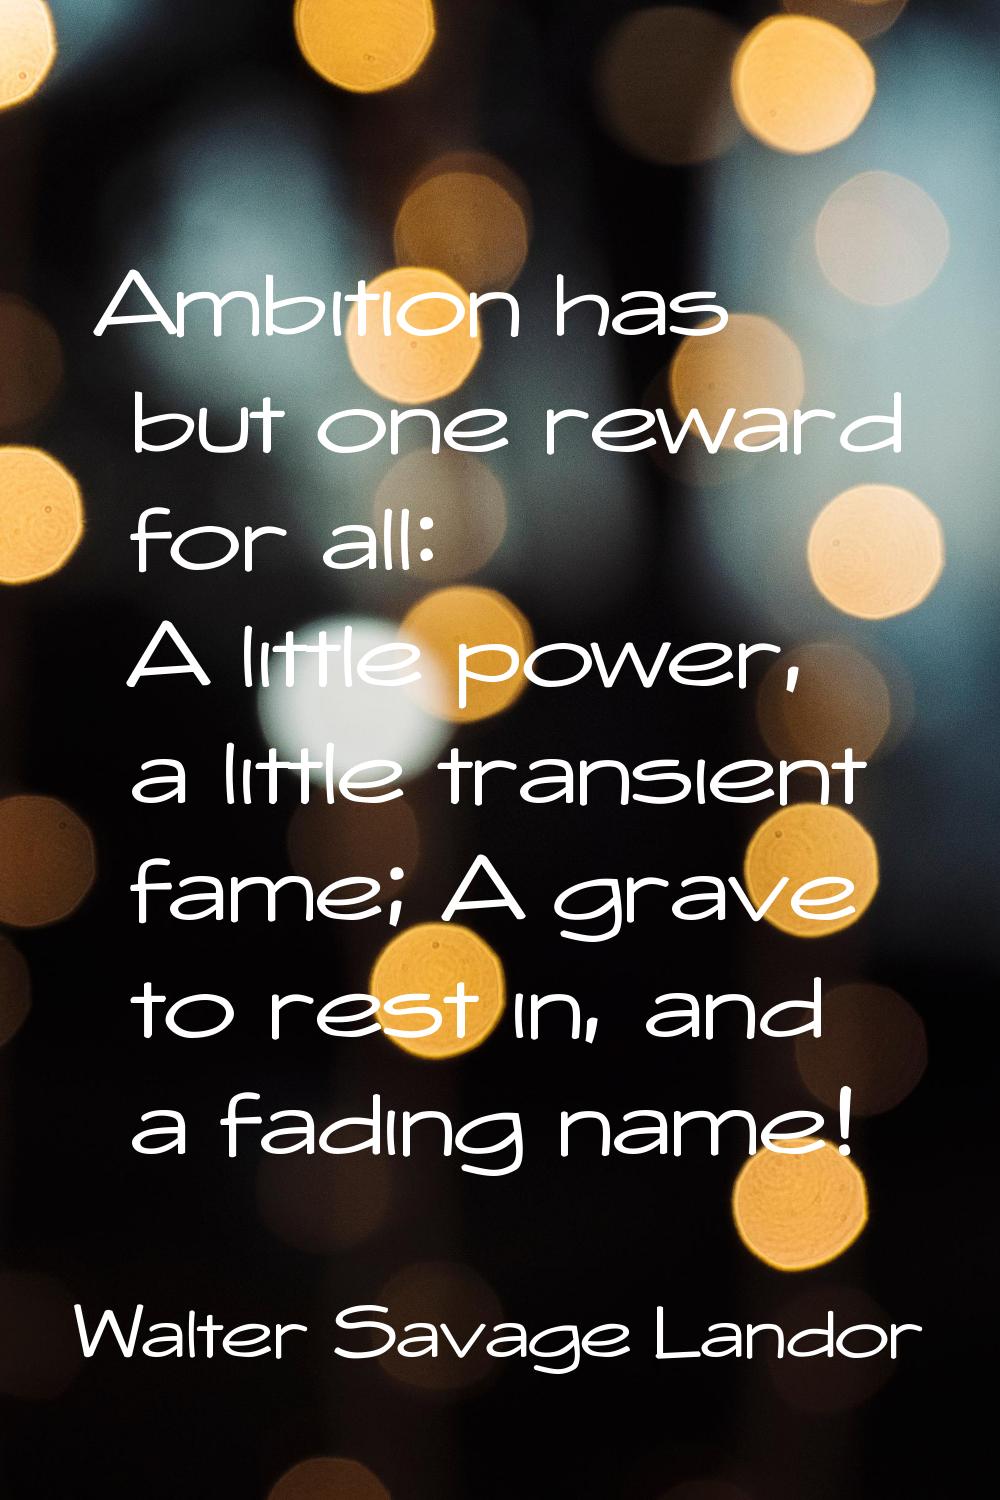 Ambition has but one reward for all: A little power, a little transient fame; A grave to rest in, a